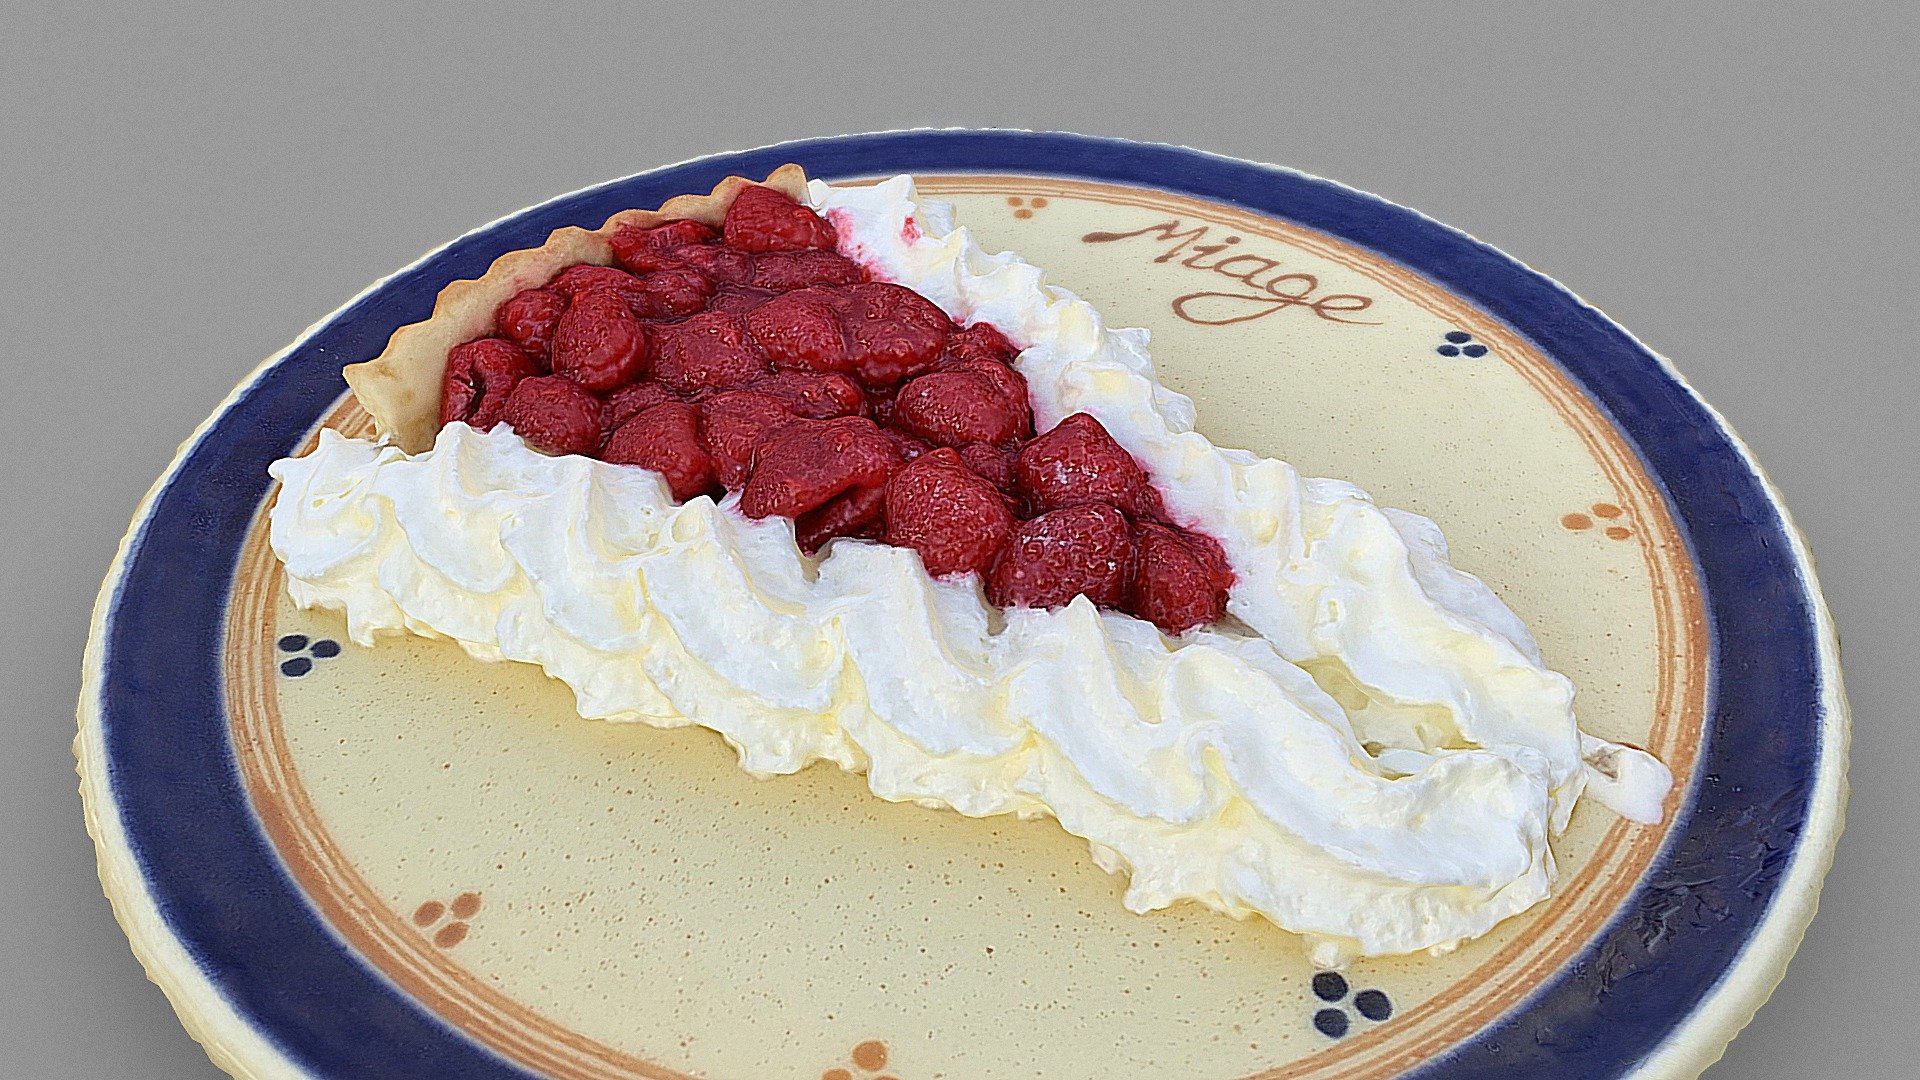 Yesterday I went hiking with my son and godson in the Alps. We slept in a beautiful mountain hut called Refuge de Miage which is at 1560m high. The diner was great, especially the desert, home made raspeberry pie with chantilly cream. Had to make a scan!

~90 photos processed with Metashape 3d model